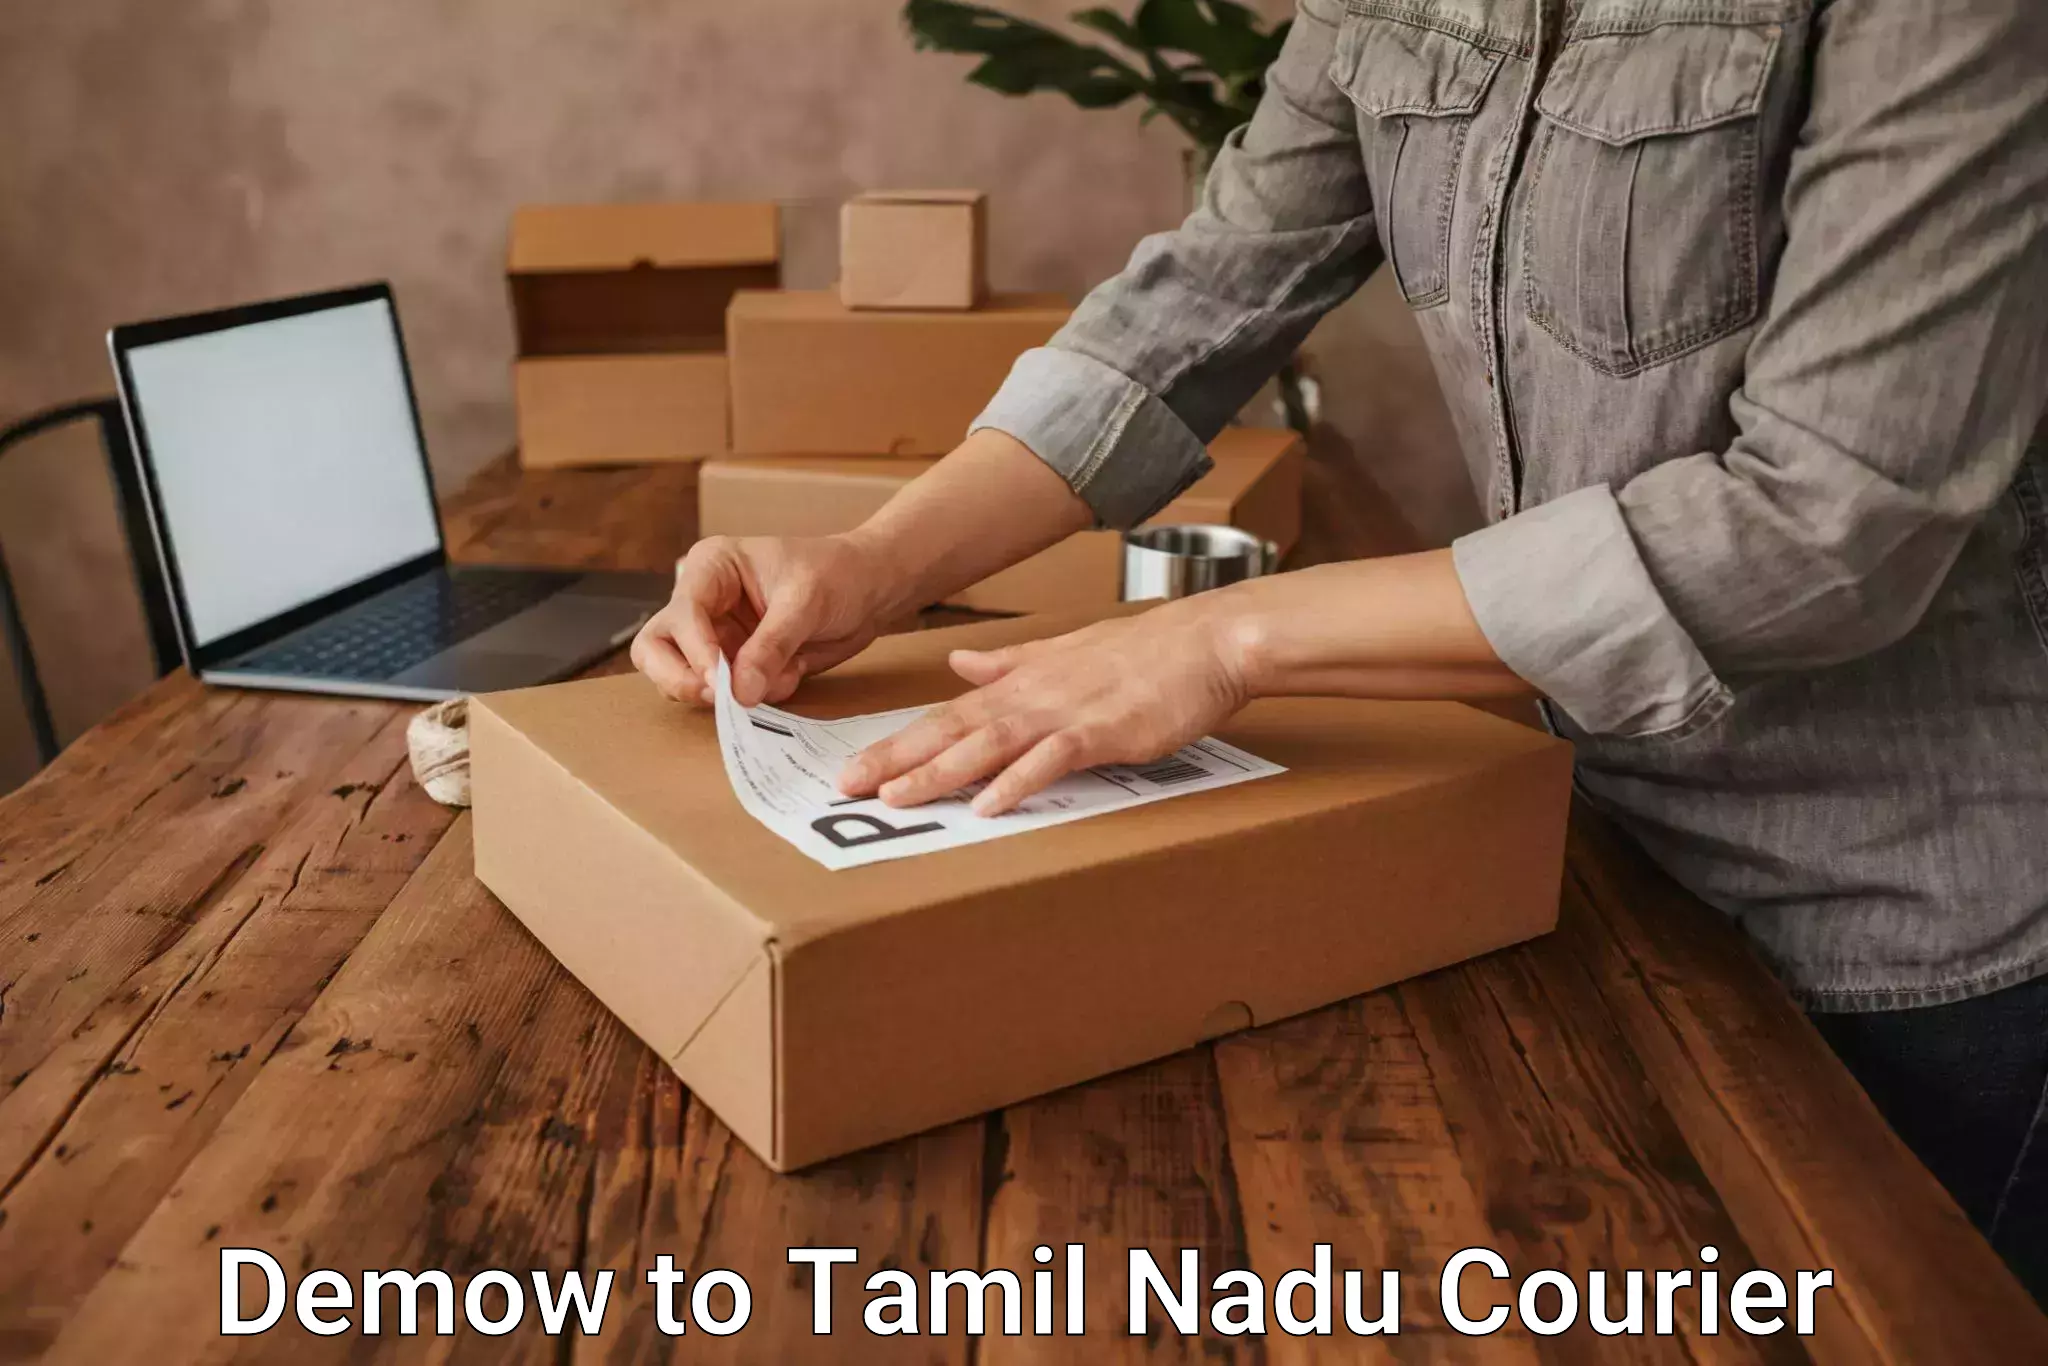 Reliable parcel services Demow to Tamil Nadu